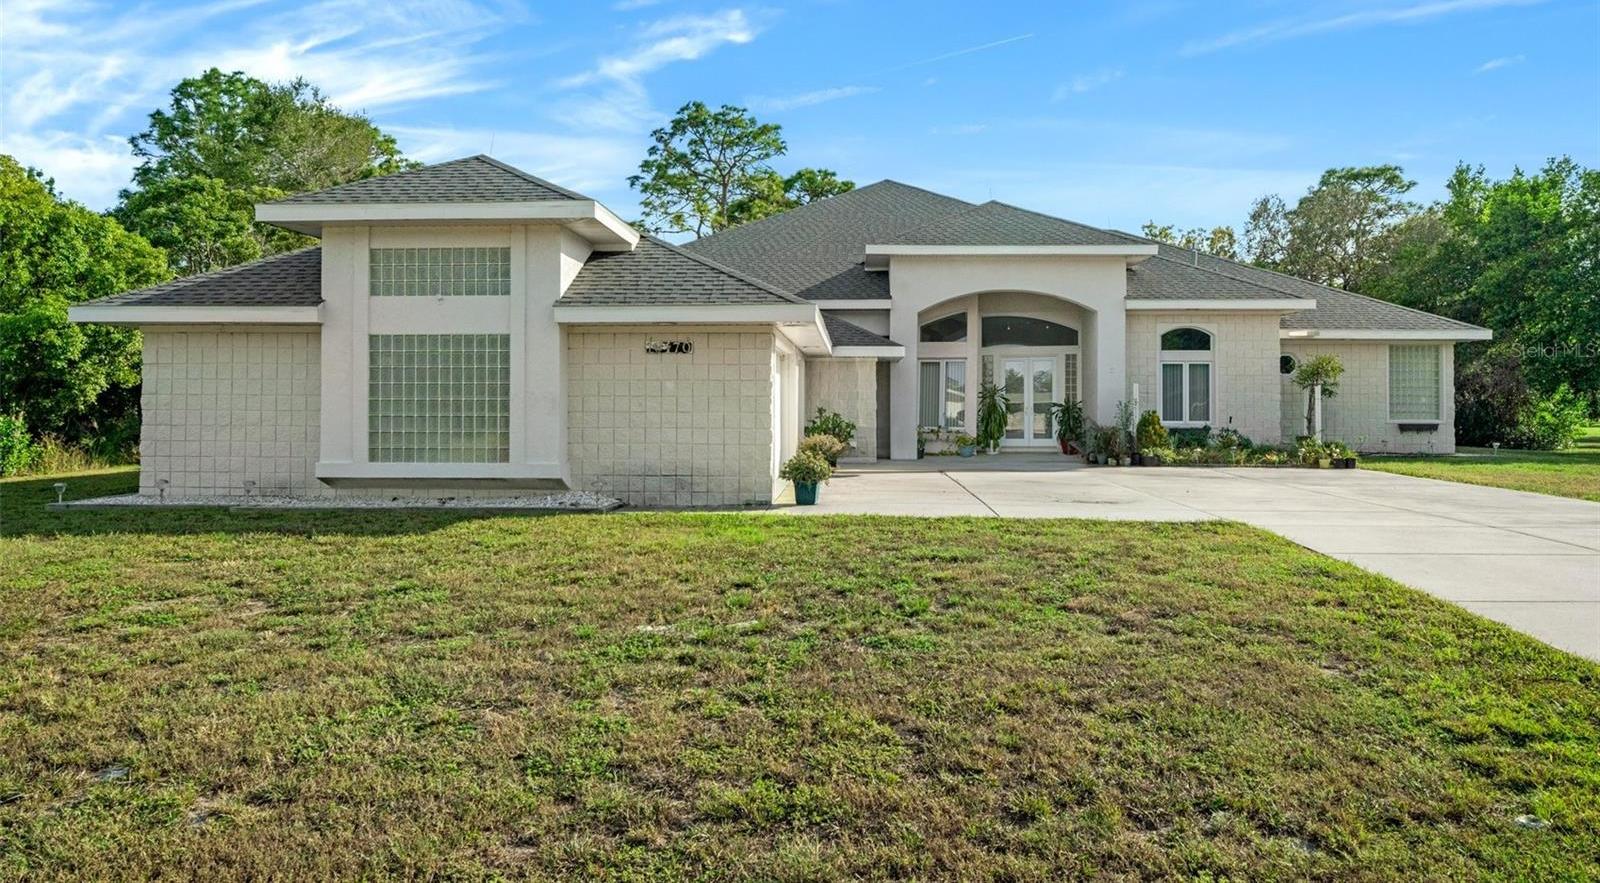 Photo one of 10170 Loretto St Spring Hill FL 34608 | MLS A4587403